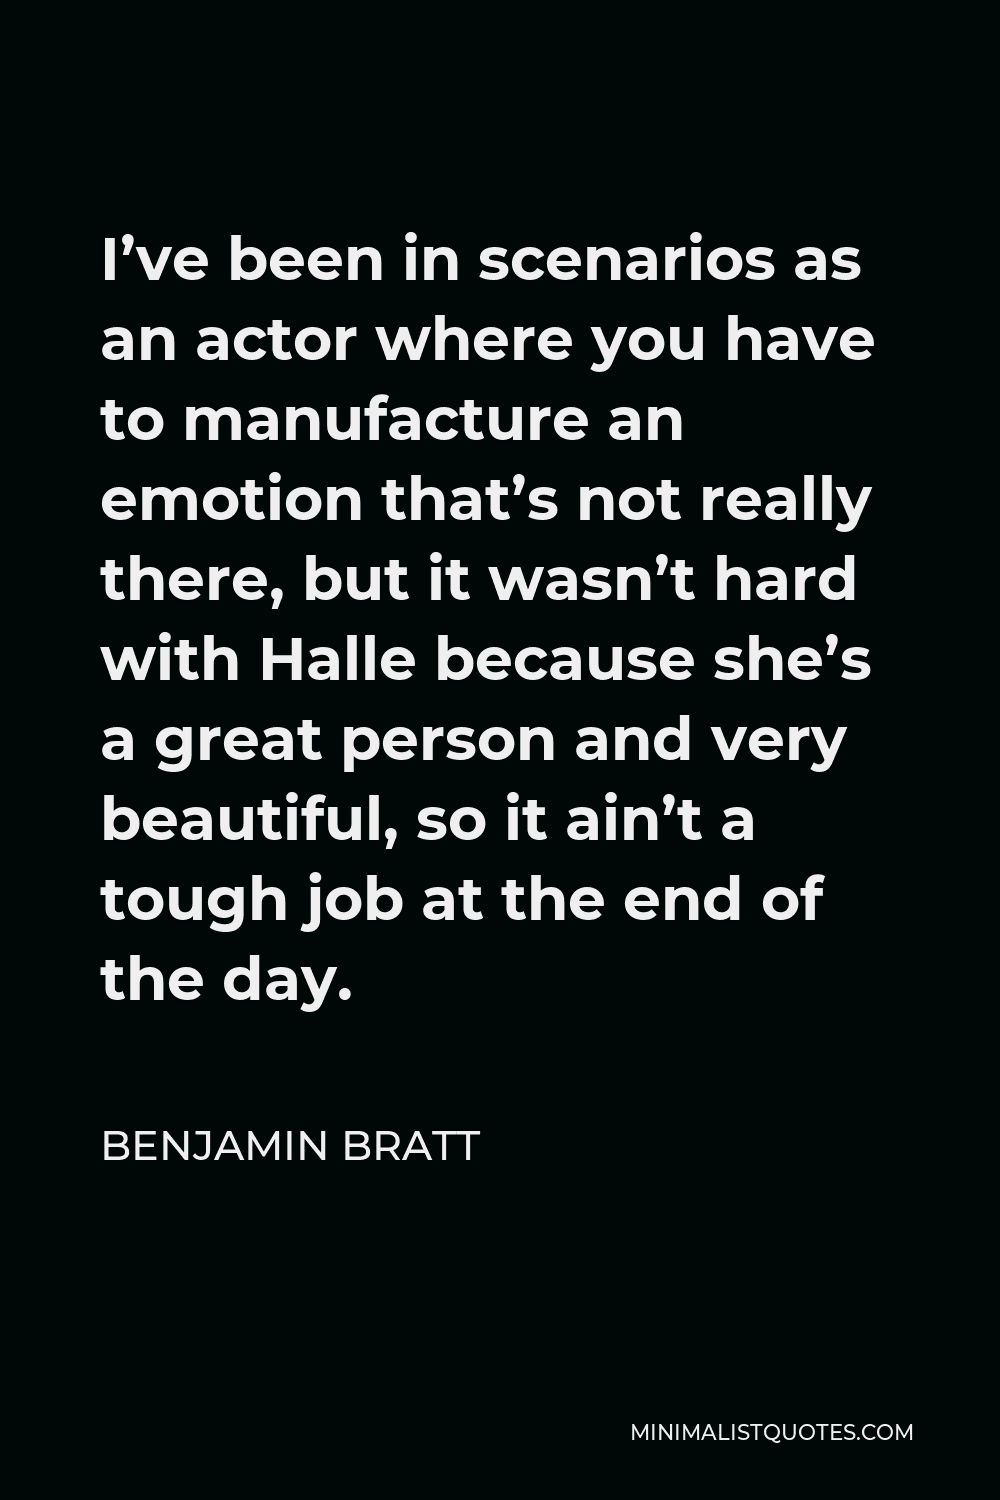 Benjamin Bratt Quote - I’ve been in scenarios as an actor where you have to manufacture an emotion that’s not really there, but it wasn’t hard with Halle because she’s a great person and very beautiful, so it ain’t a tough job at the end of the day.